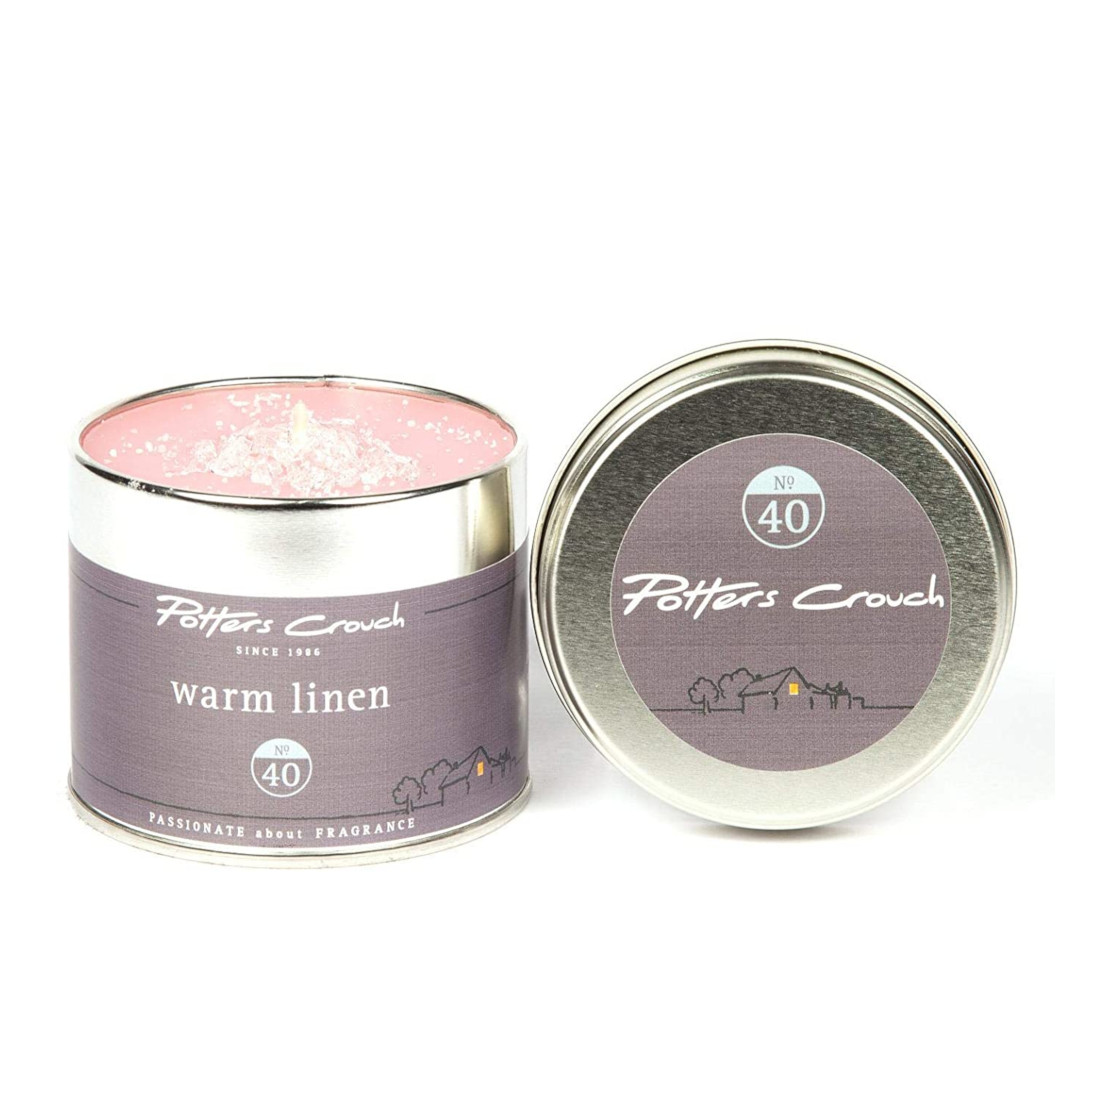 Potters Crouch Warm Linen Tin Candle